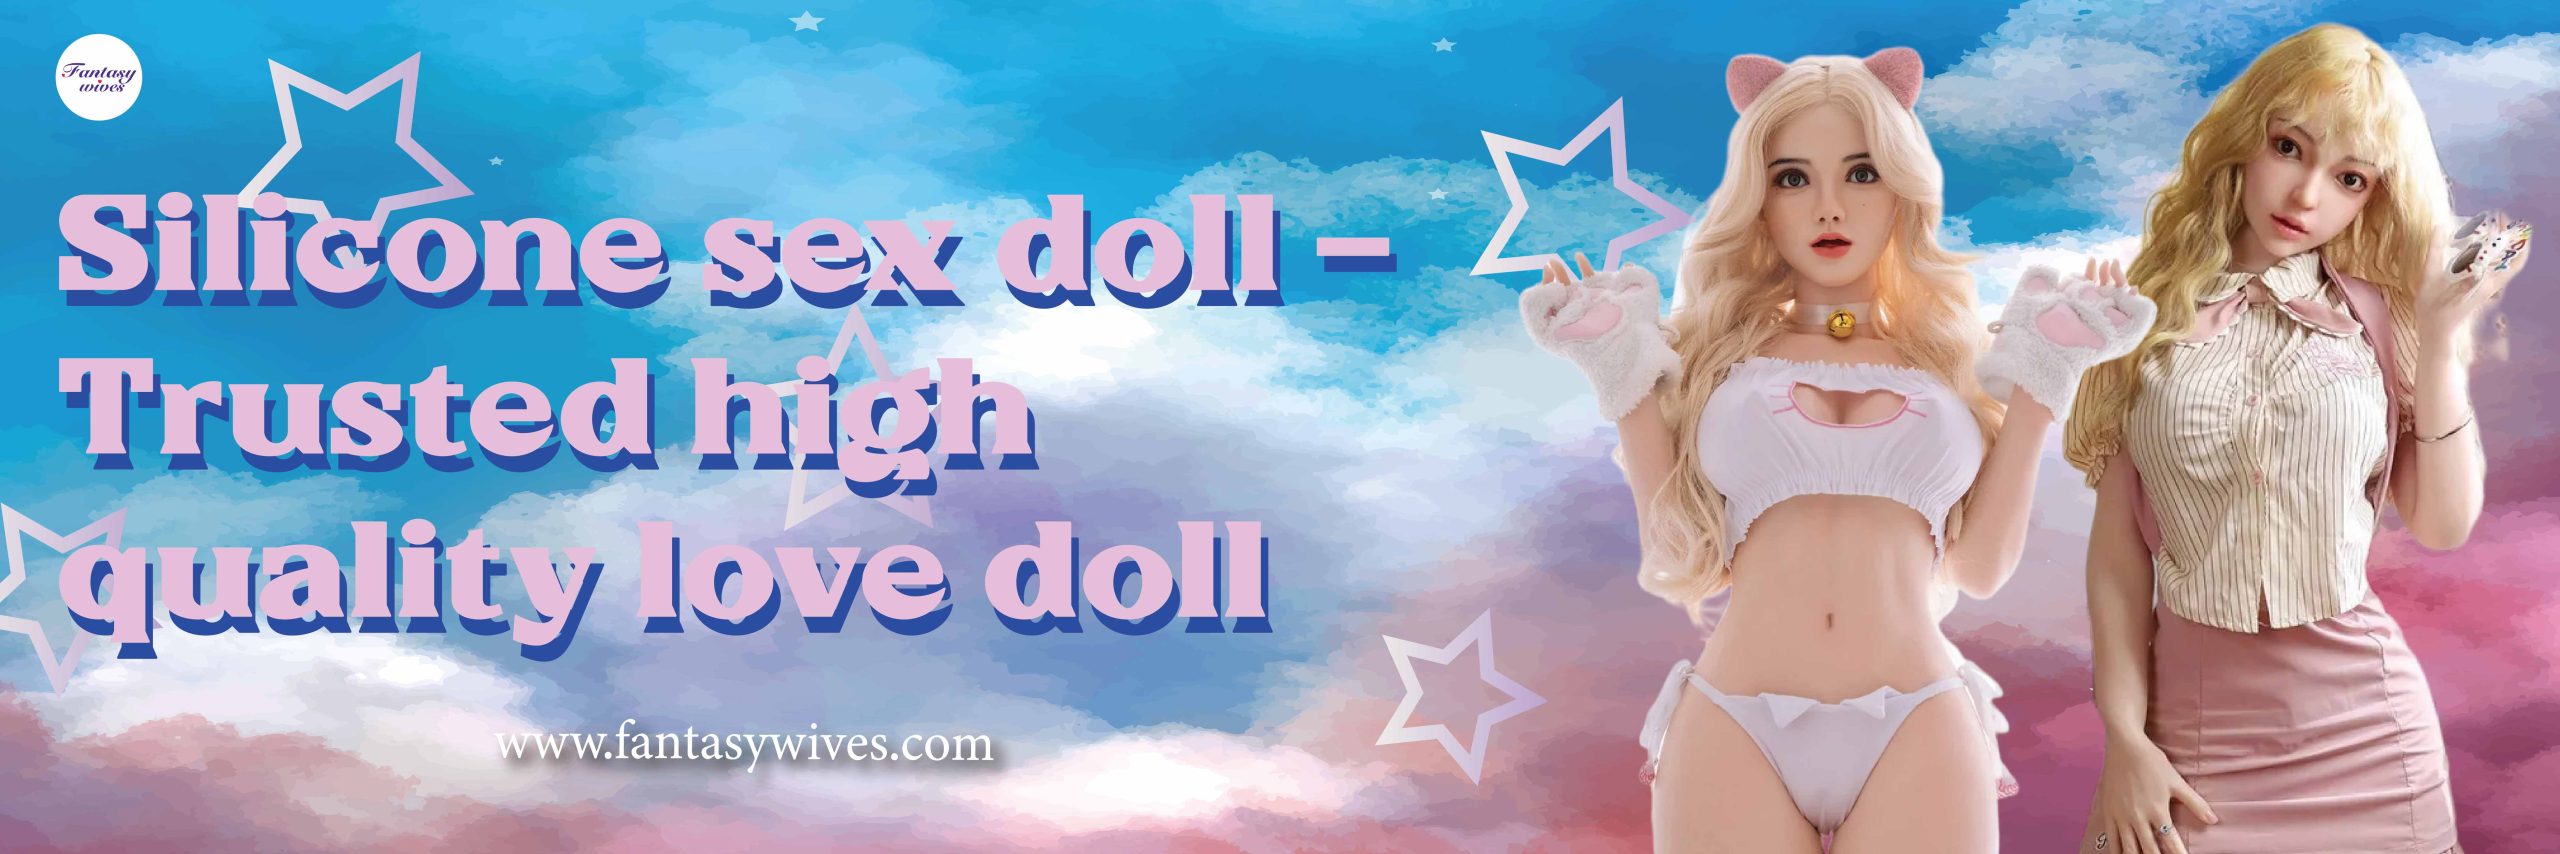 FantasyWives sex doll category top banner